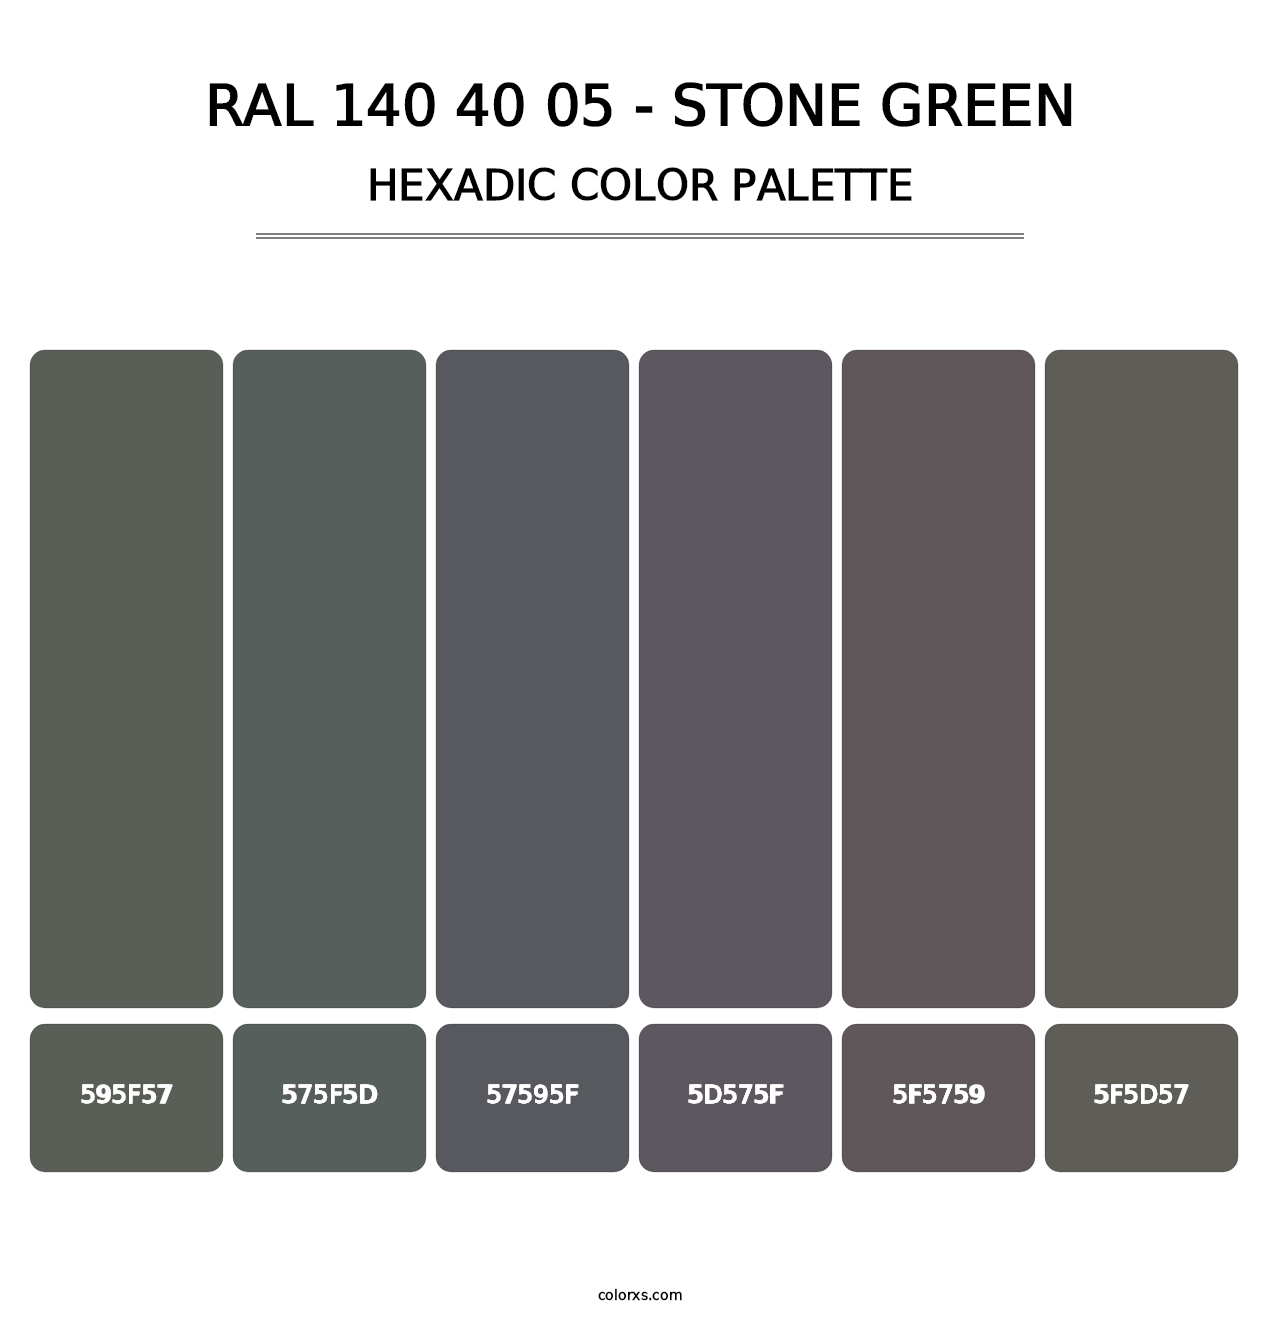 RAL 140 40 05 - Stone Green - Hexadic Color Palette